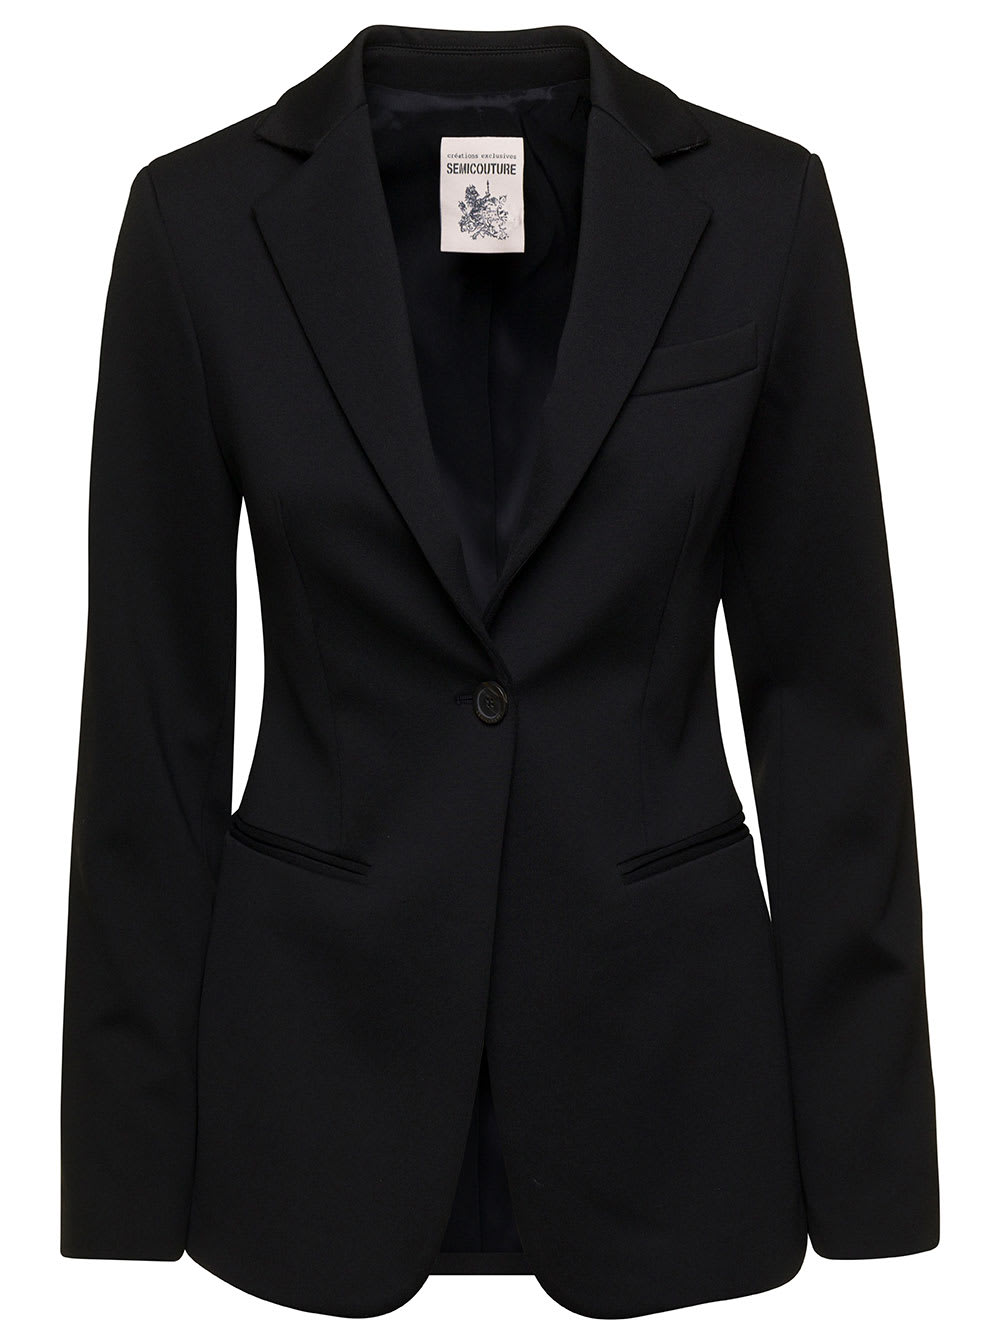 SEMICOUTURE BLACK FITTED SINGLE BREASTED BLAZER IN BLACK VISCOSE BLEND WOMAN